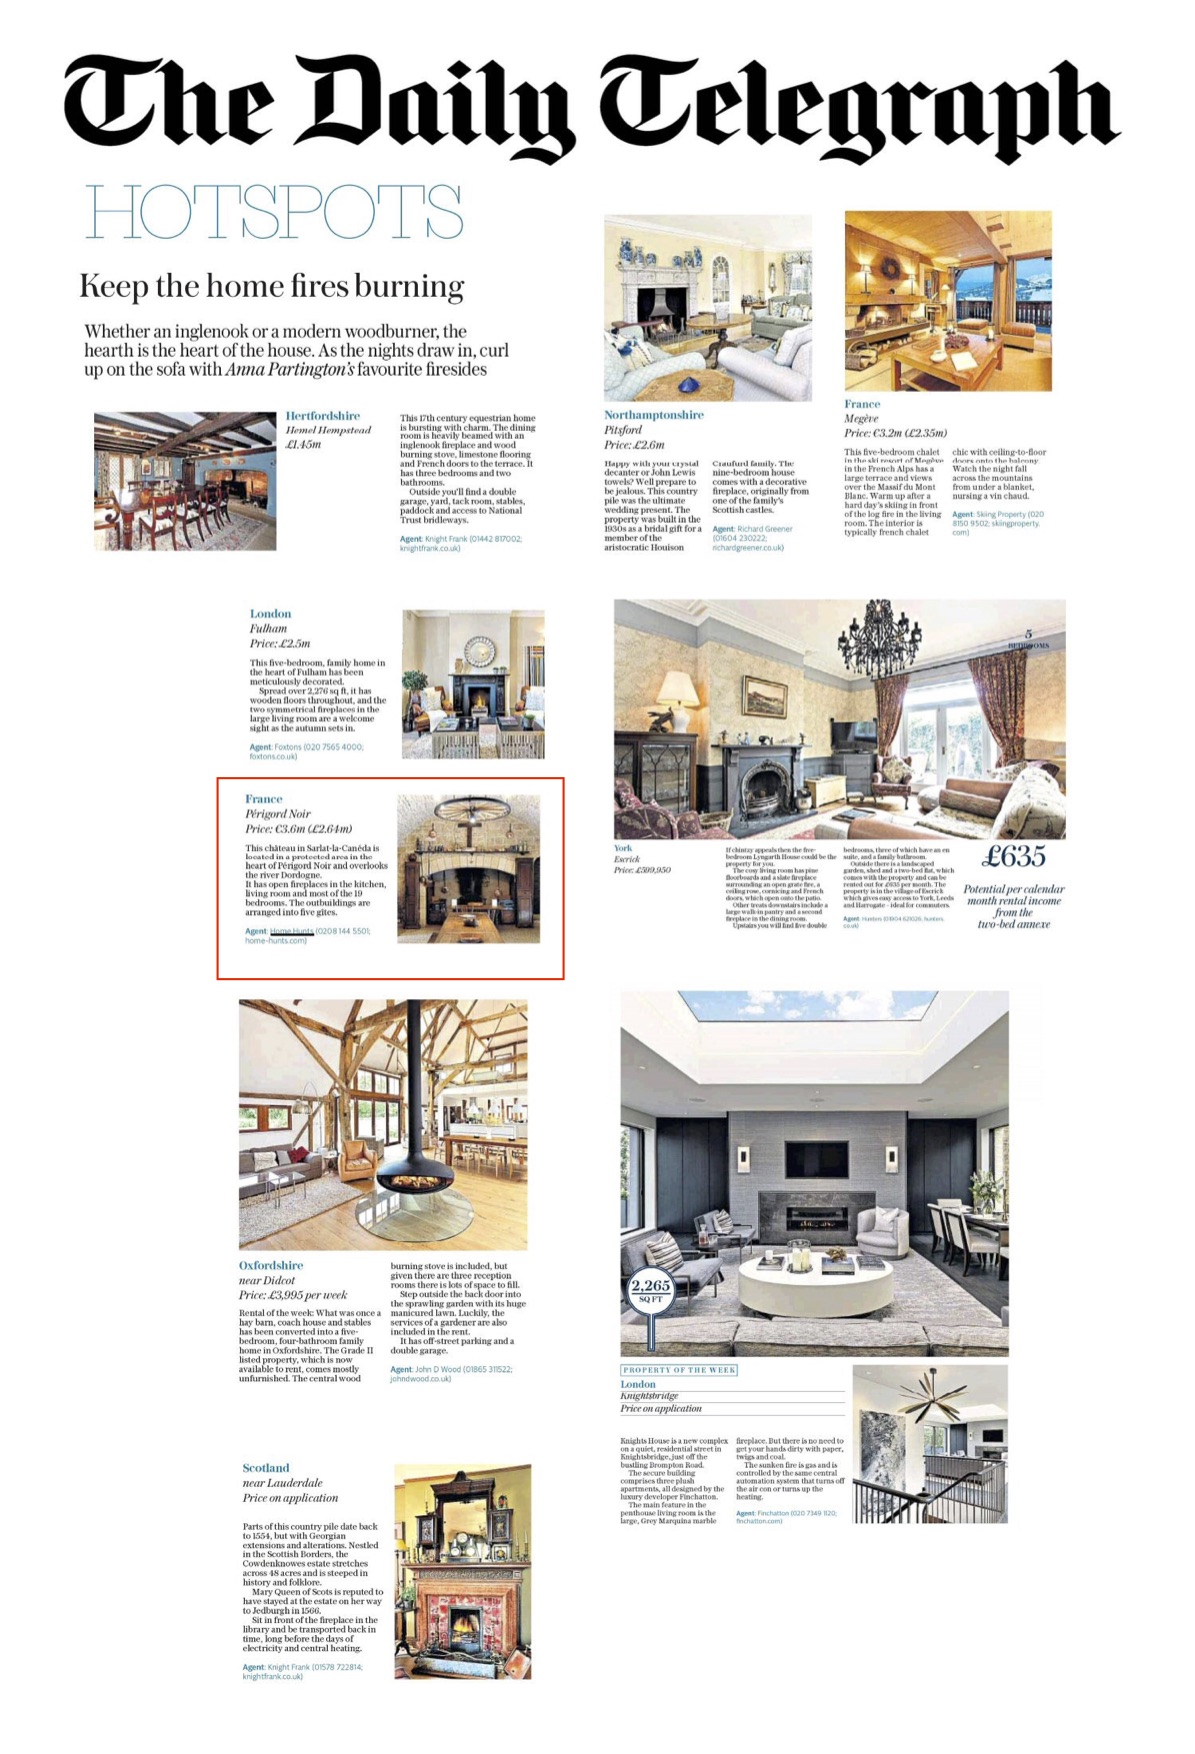 Daily Telegraph – Property hotspots (homes with open fires)